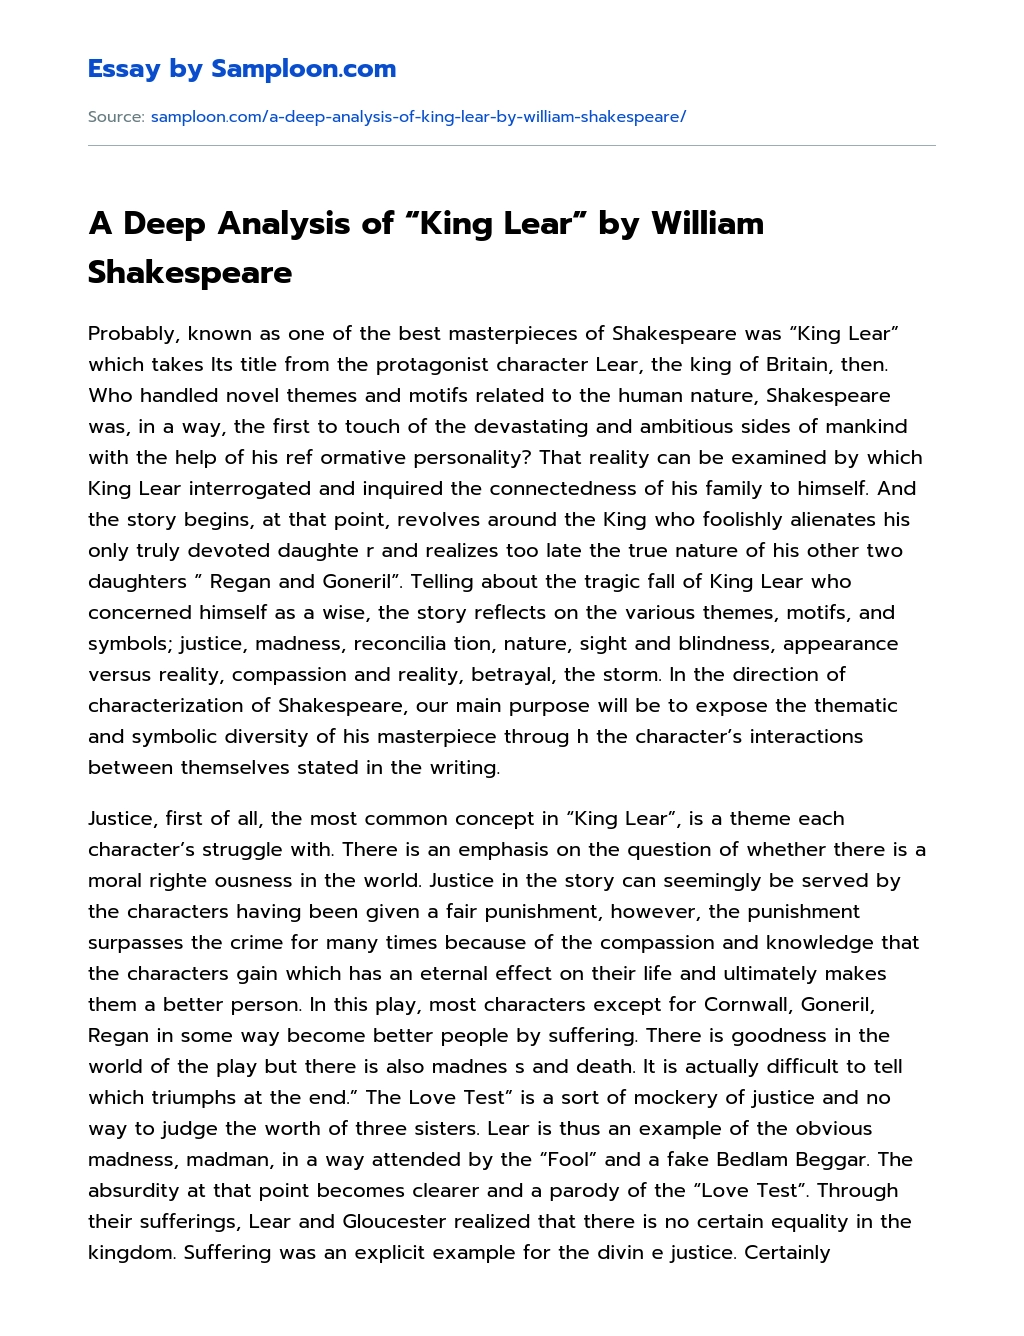 A Deep Analysis of “King Lear” by William Shakespeare Analytical Essay essay